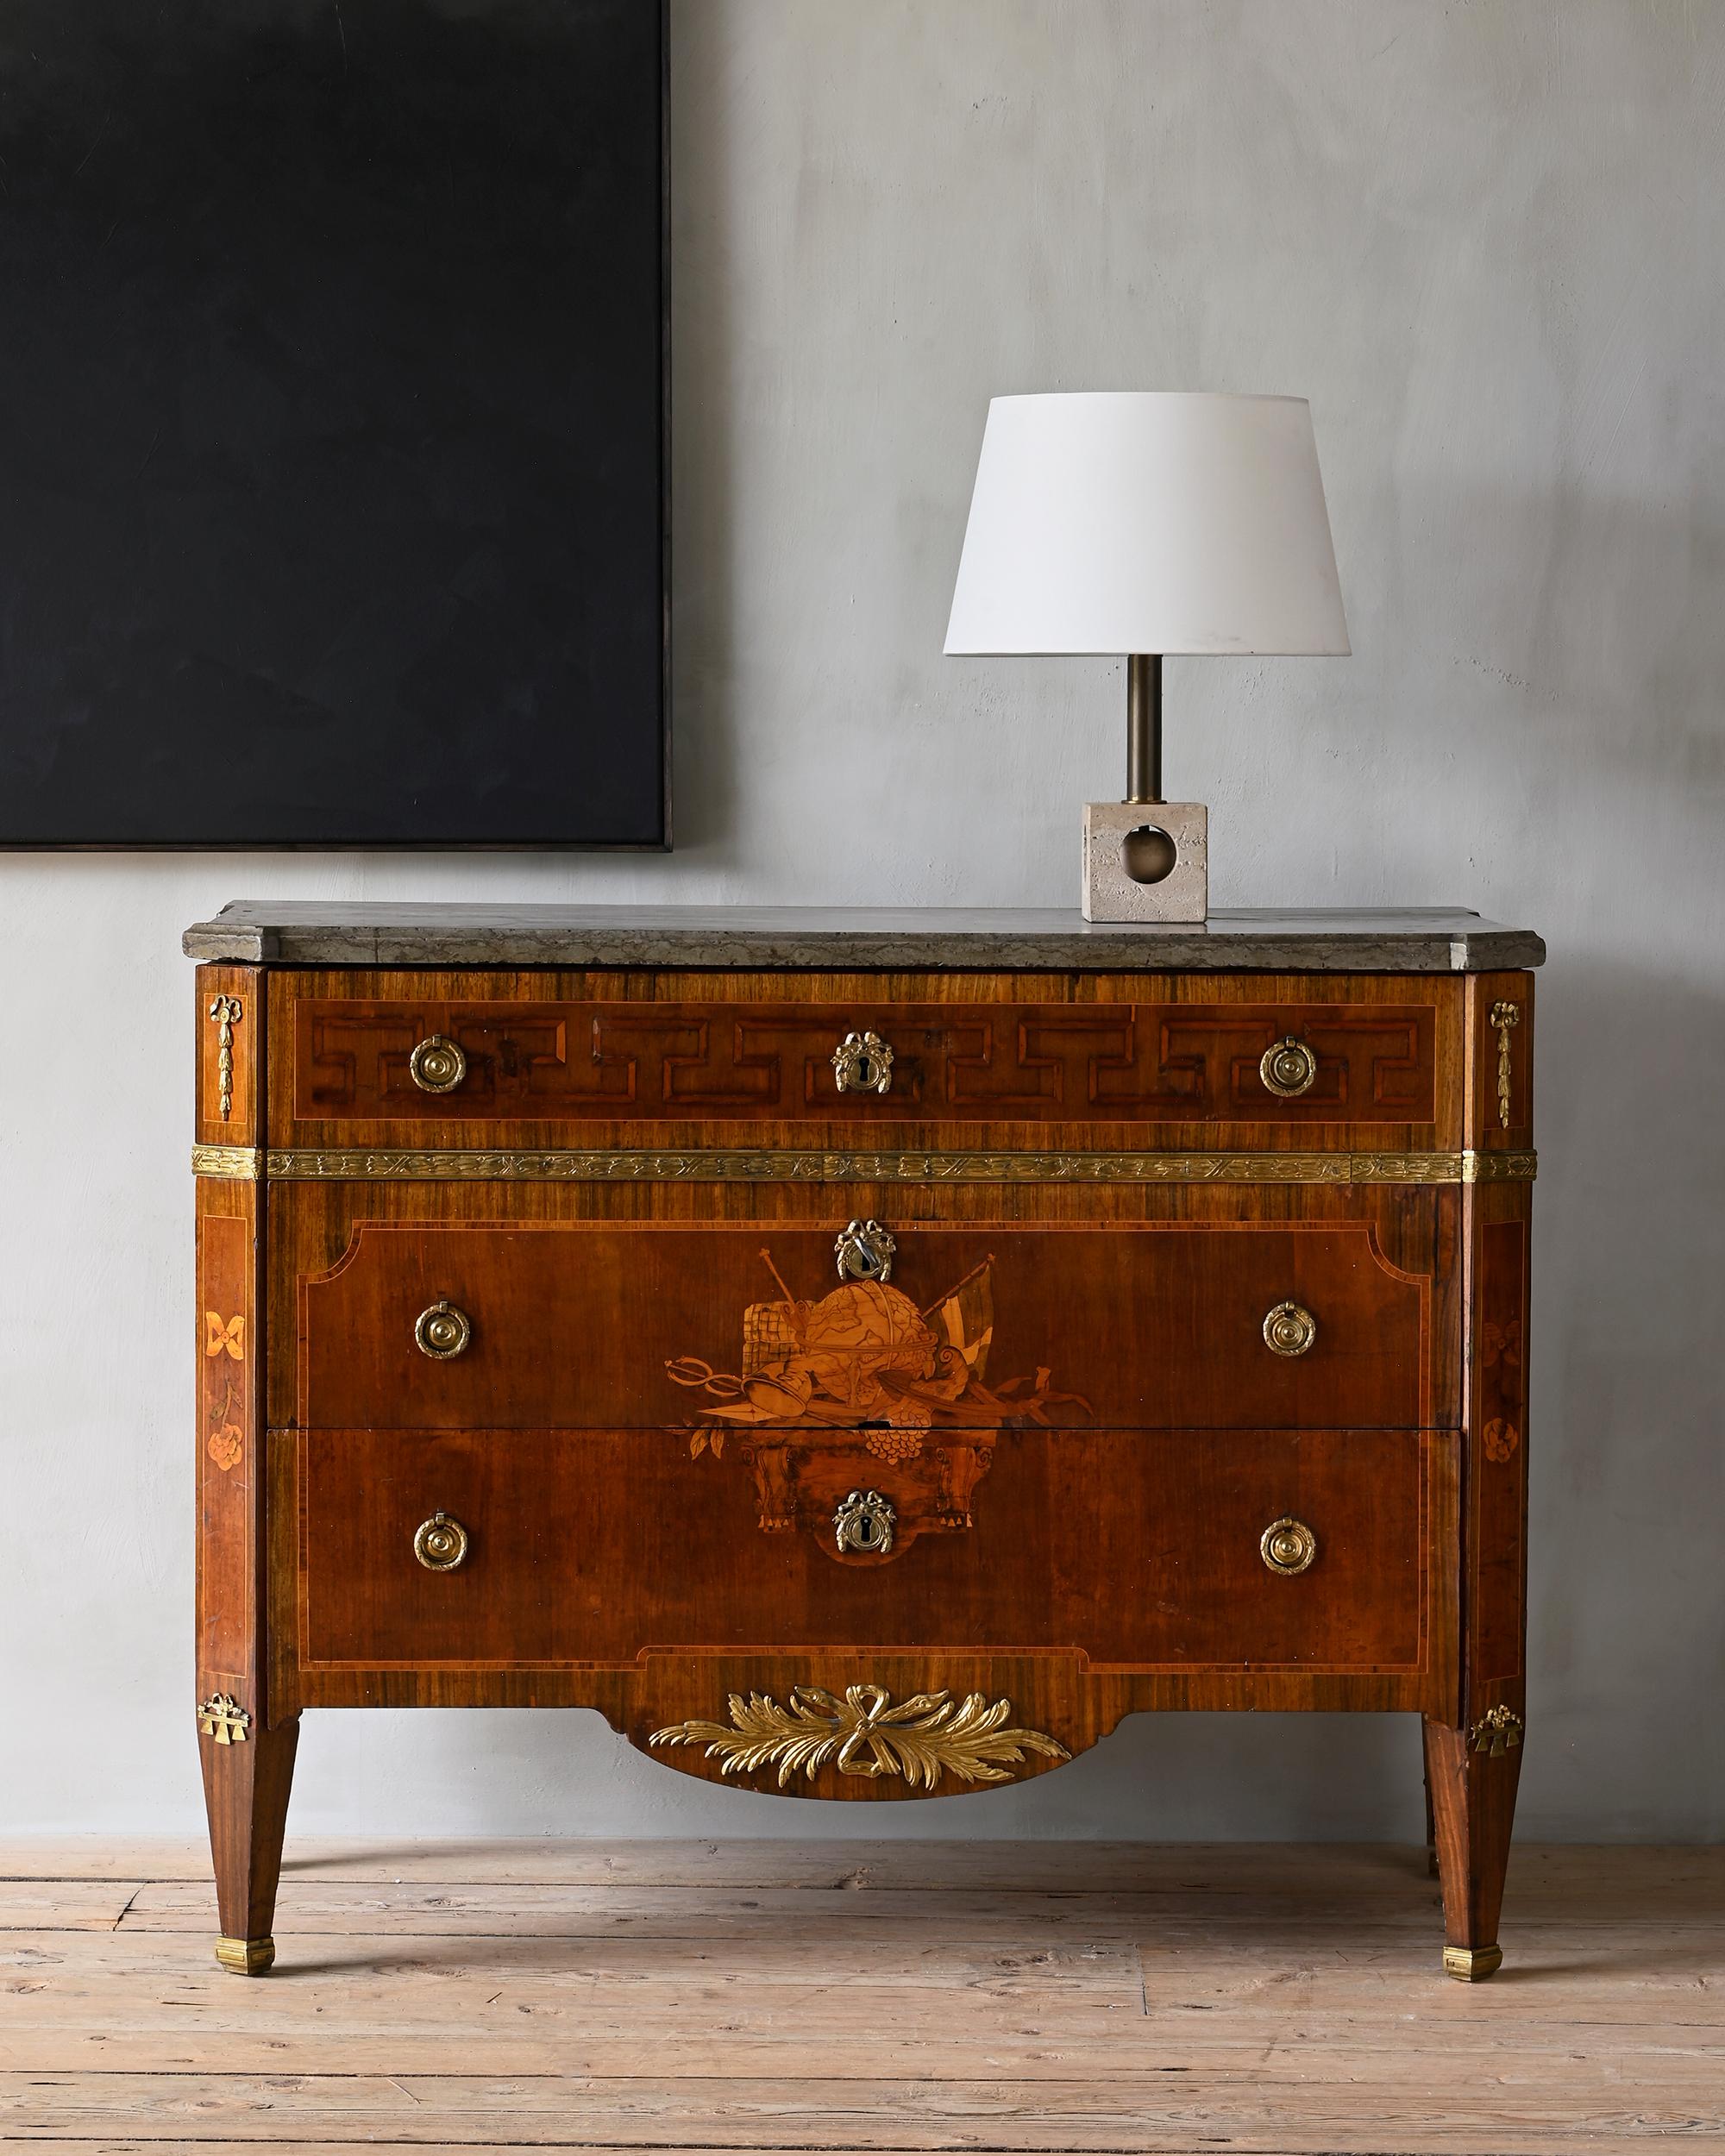 Exceptional early 19th century Gustavian chest of drawers veneered with amaranth, birch, jacaranda and maple. Limestone top, gilt brass fittings, à la greque upper case and sides, front with marquetry symbolising seafaring and commerce with emblems